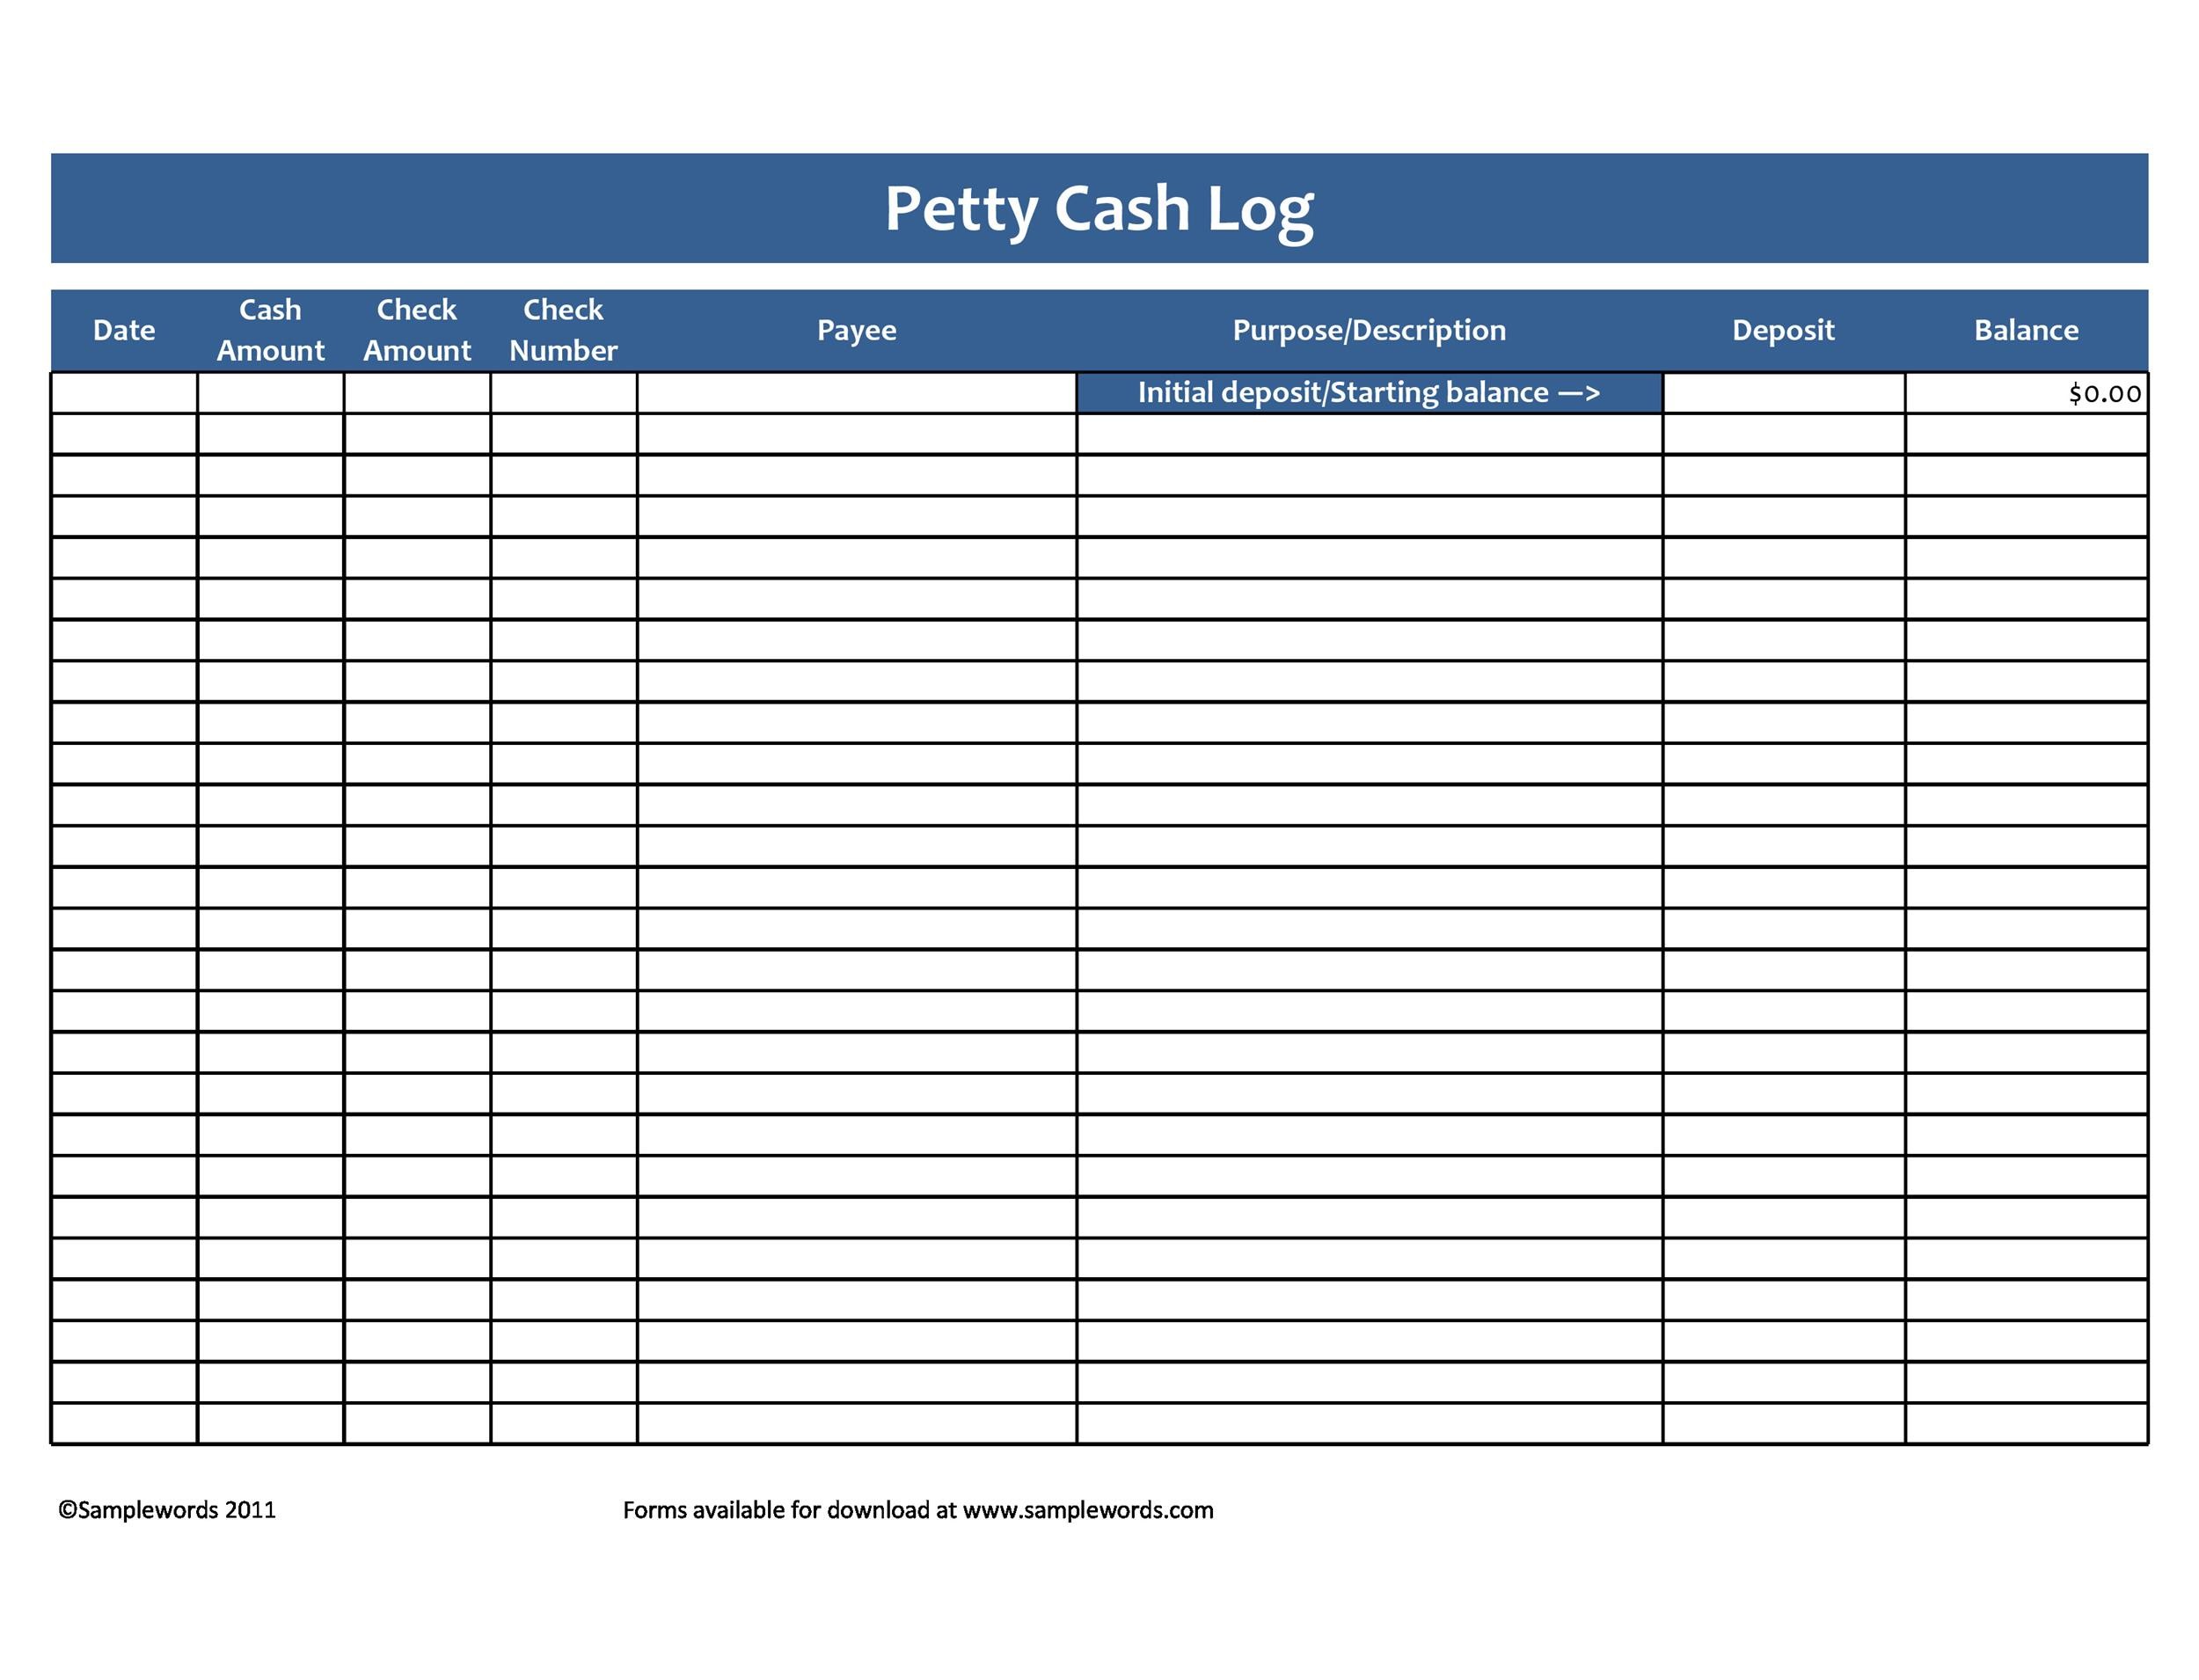 This printable form is designed to keep track of all petty cash.